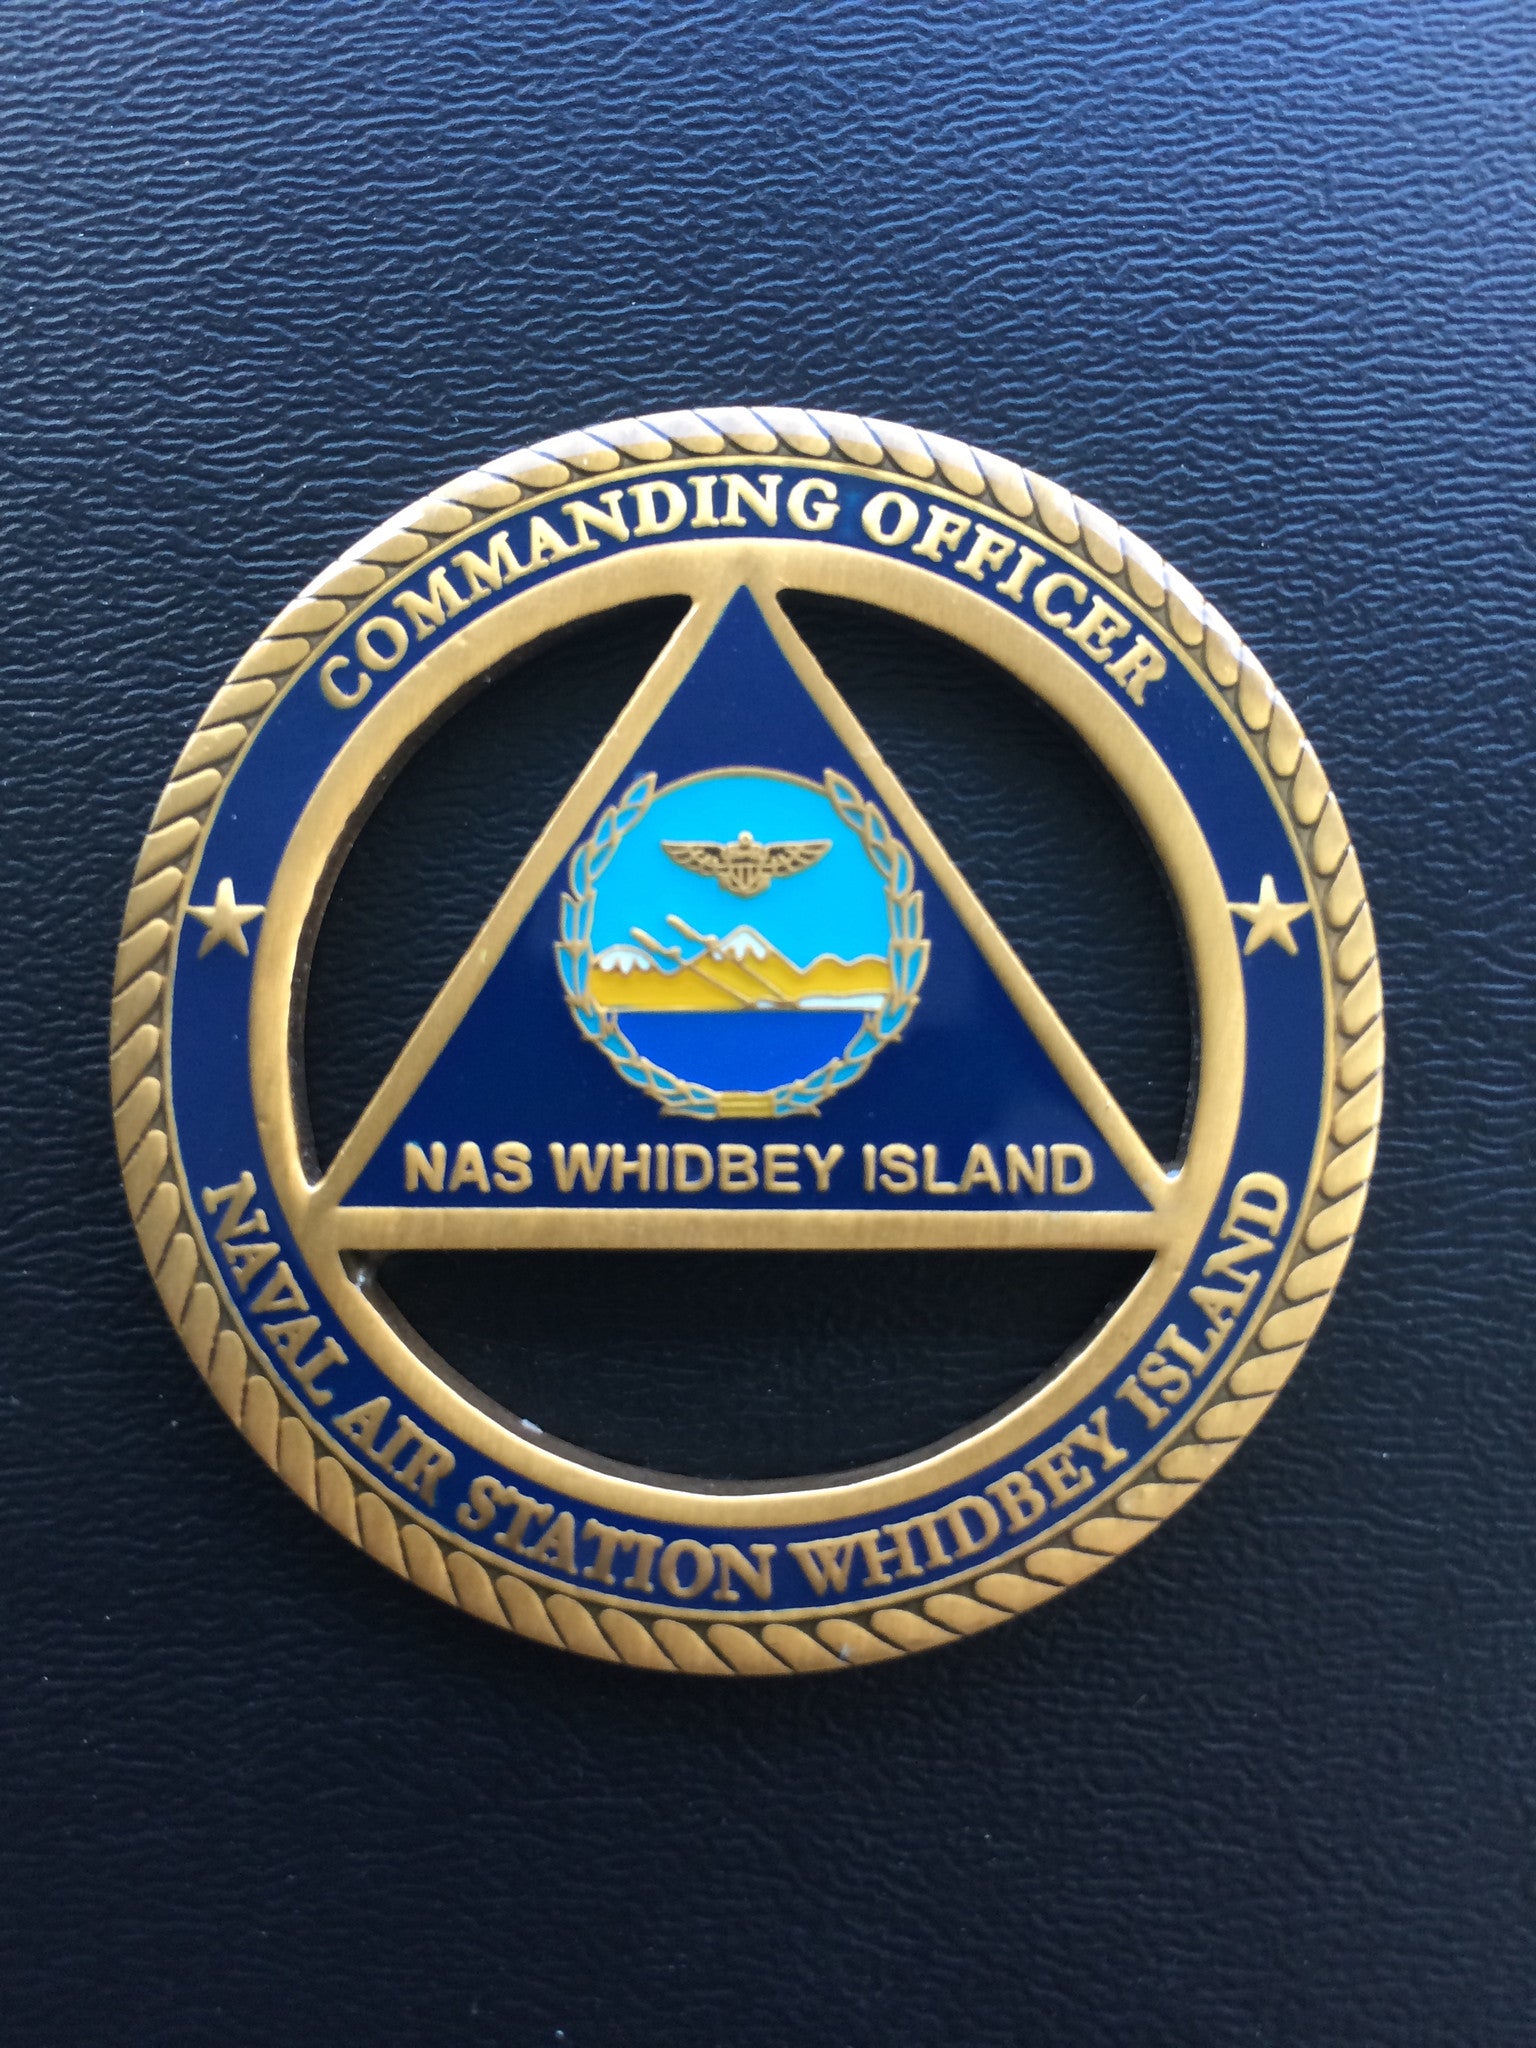 Naval Air Station (NAS) Whidbey Island Commanding Officer